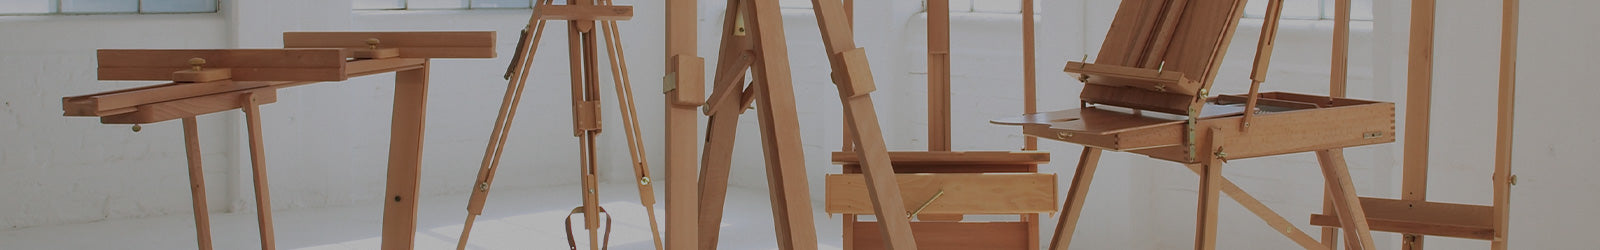 Painting Easels, Portable Easels and Art Easels